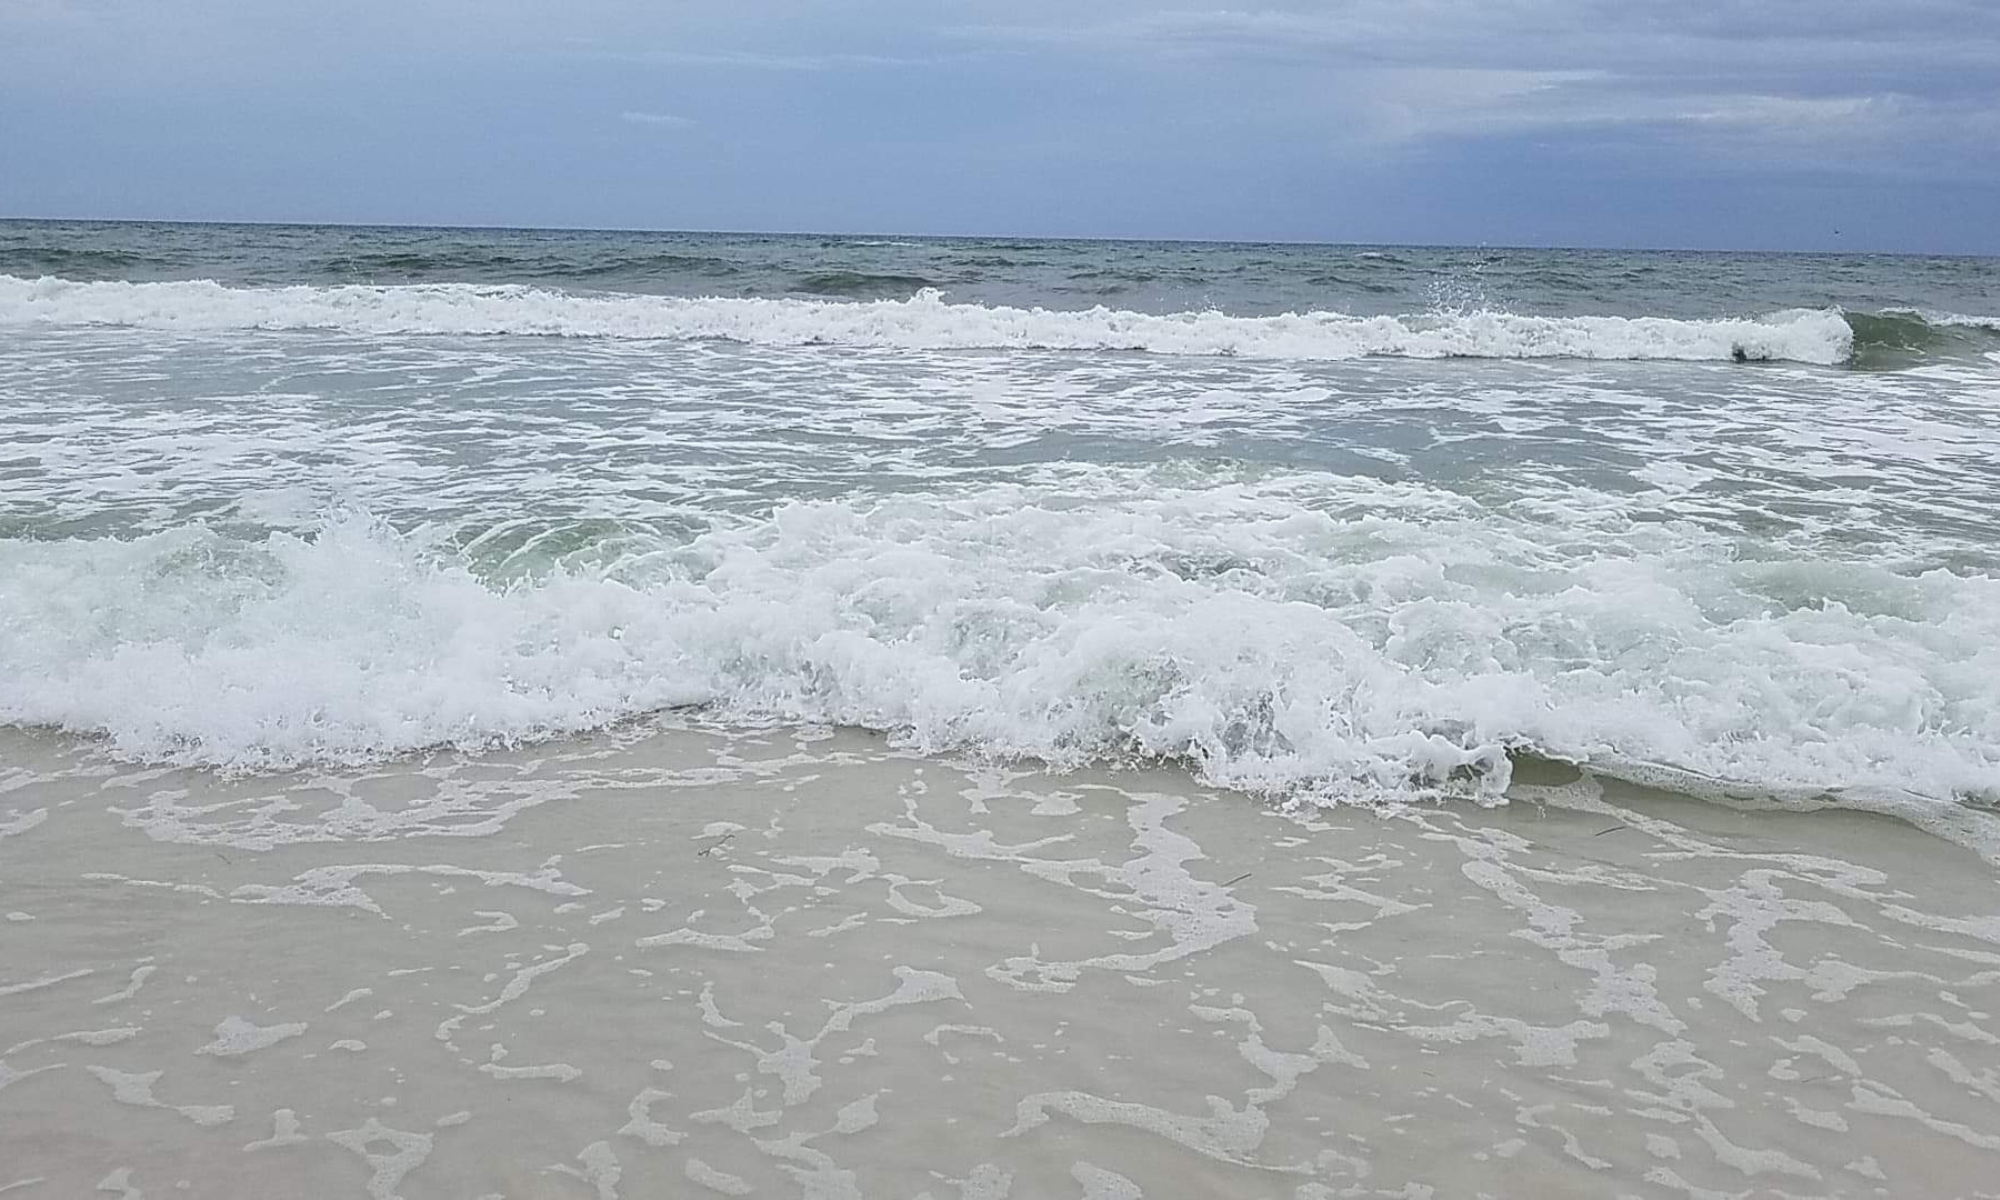 A picture of ocean waves crashing on the beach